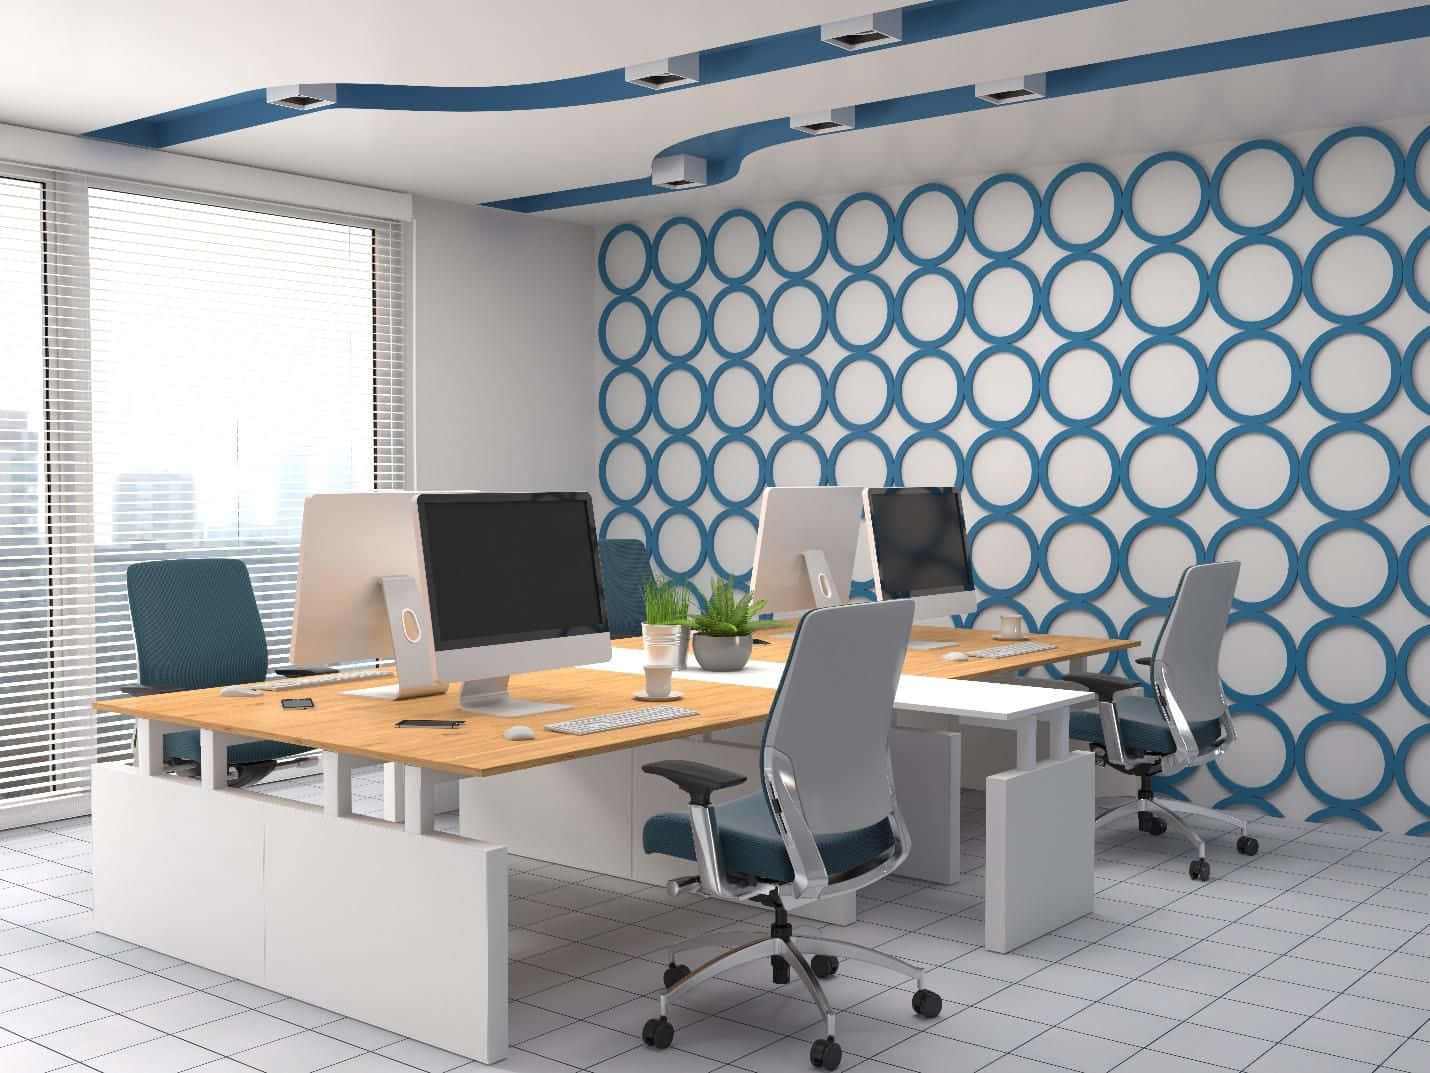 Bring new life to your office with inspiring wall decor." Wallpaper